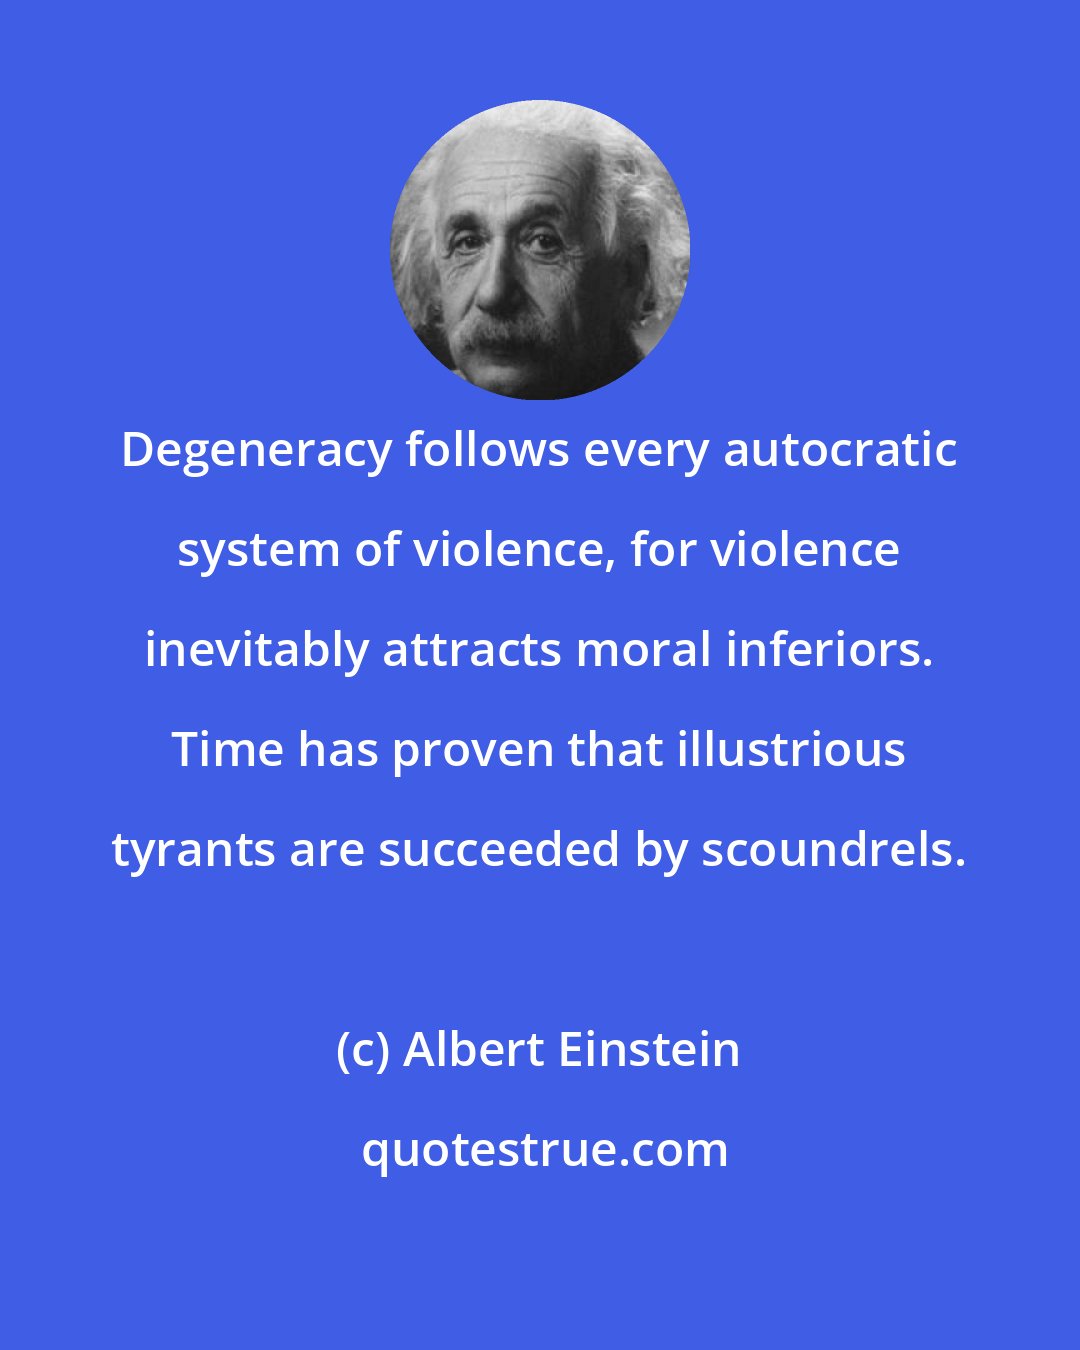 Albert Einstein: Degeneracy follows every autocratic system of violence, for violence inevitably attracts moral inferiors. Time has proven that illustrious tyrants are succeeded by scoundrels.